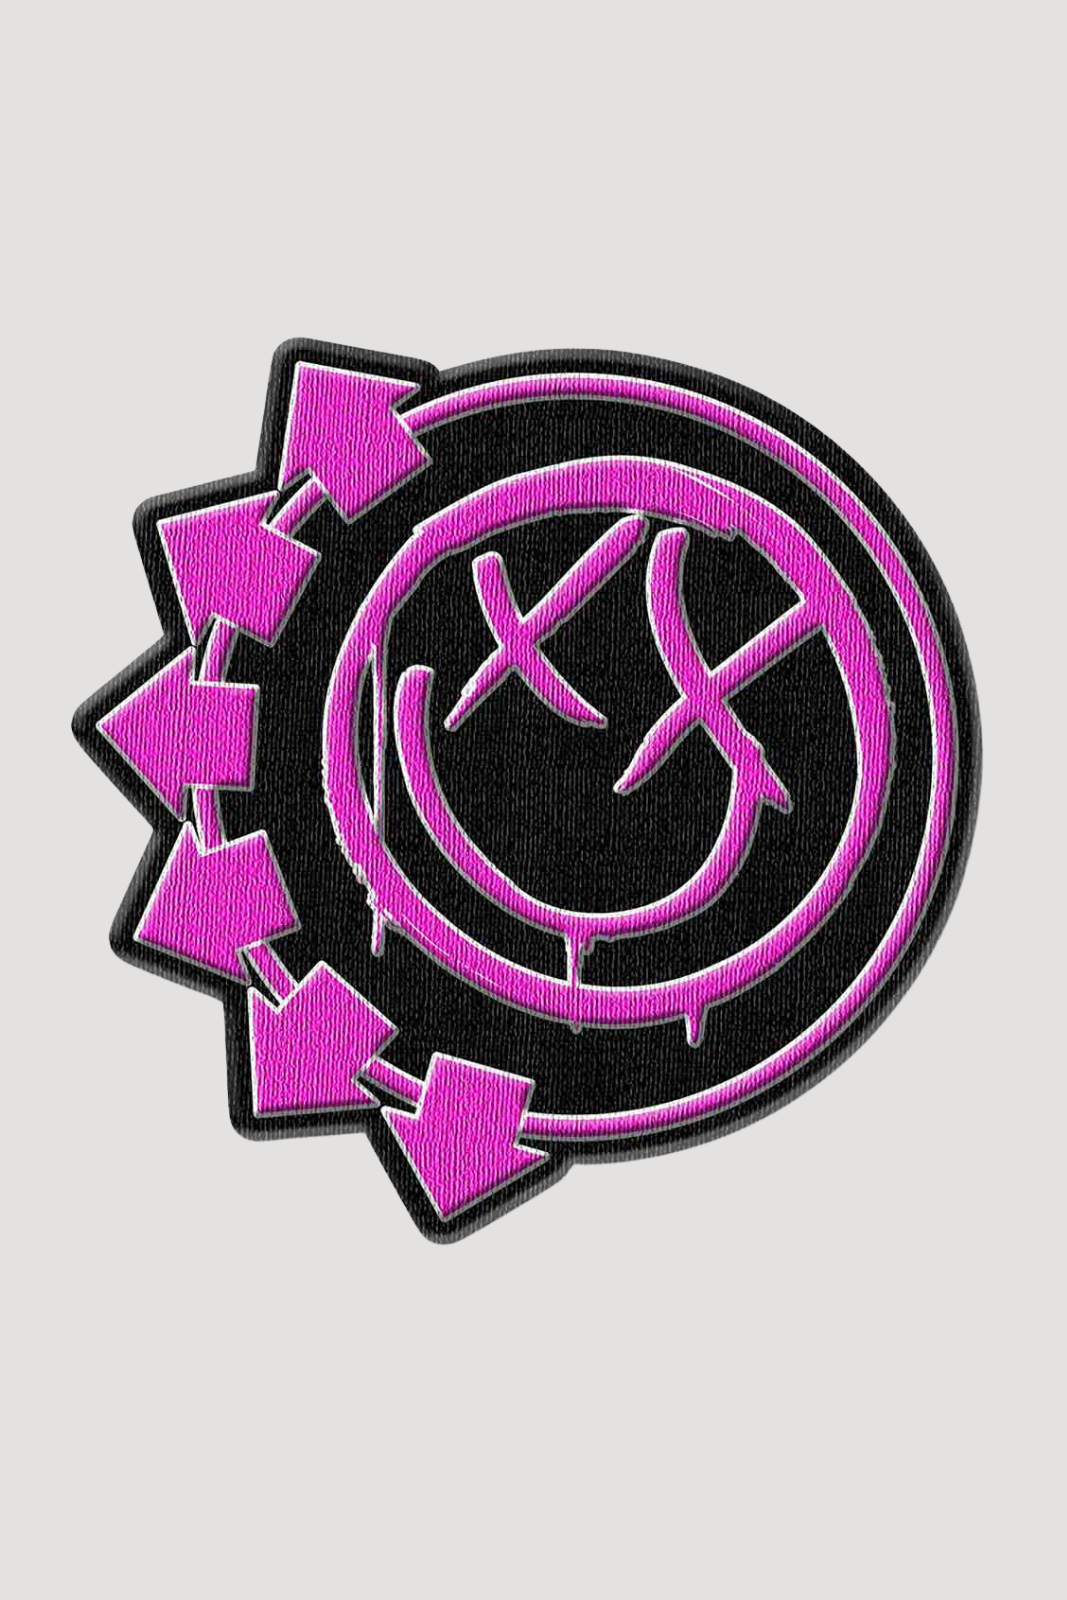 Blink 182 Smiley Patch